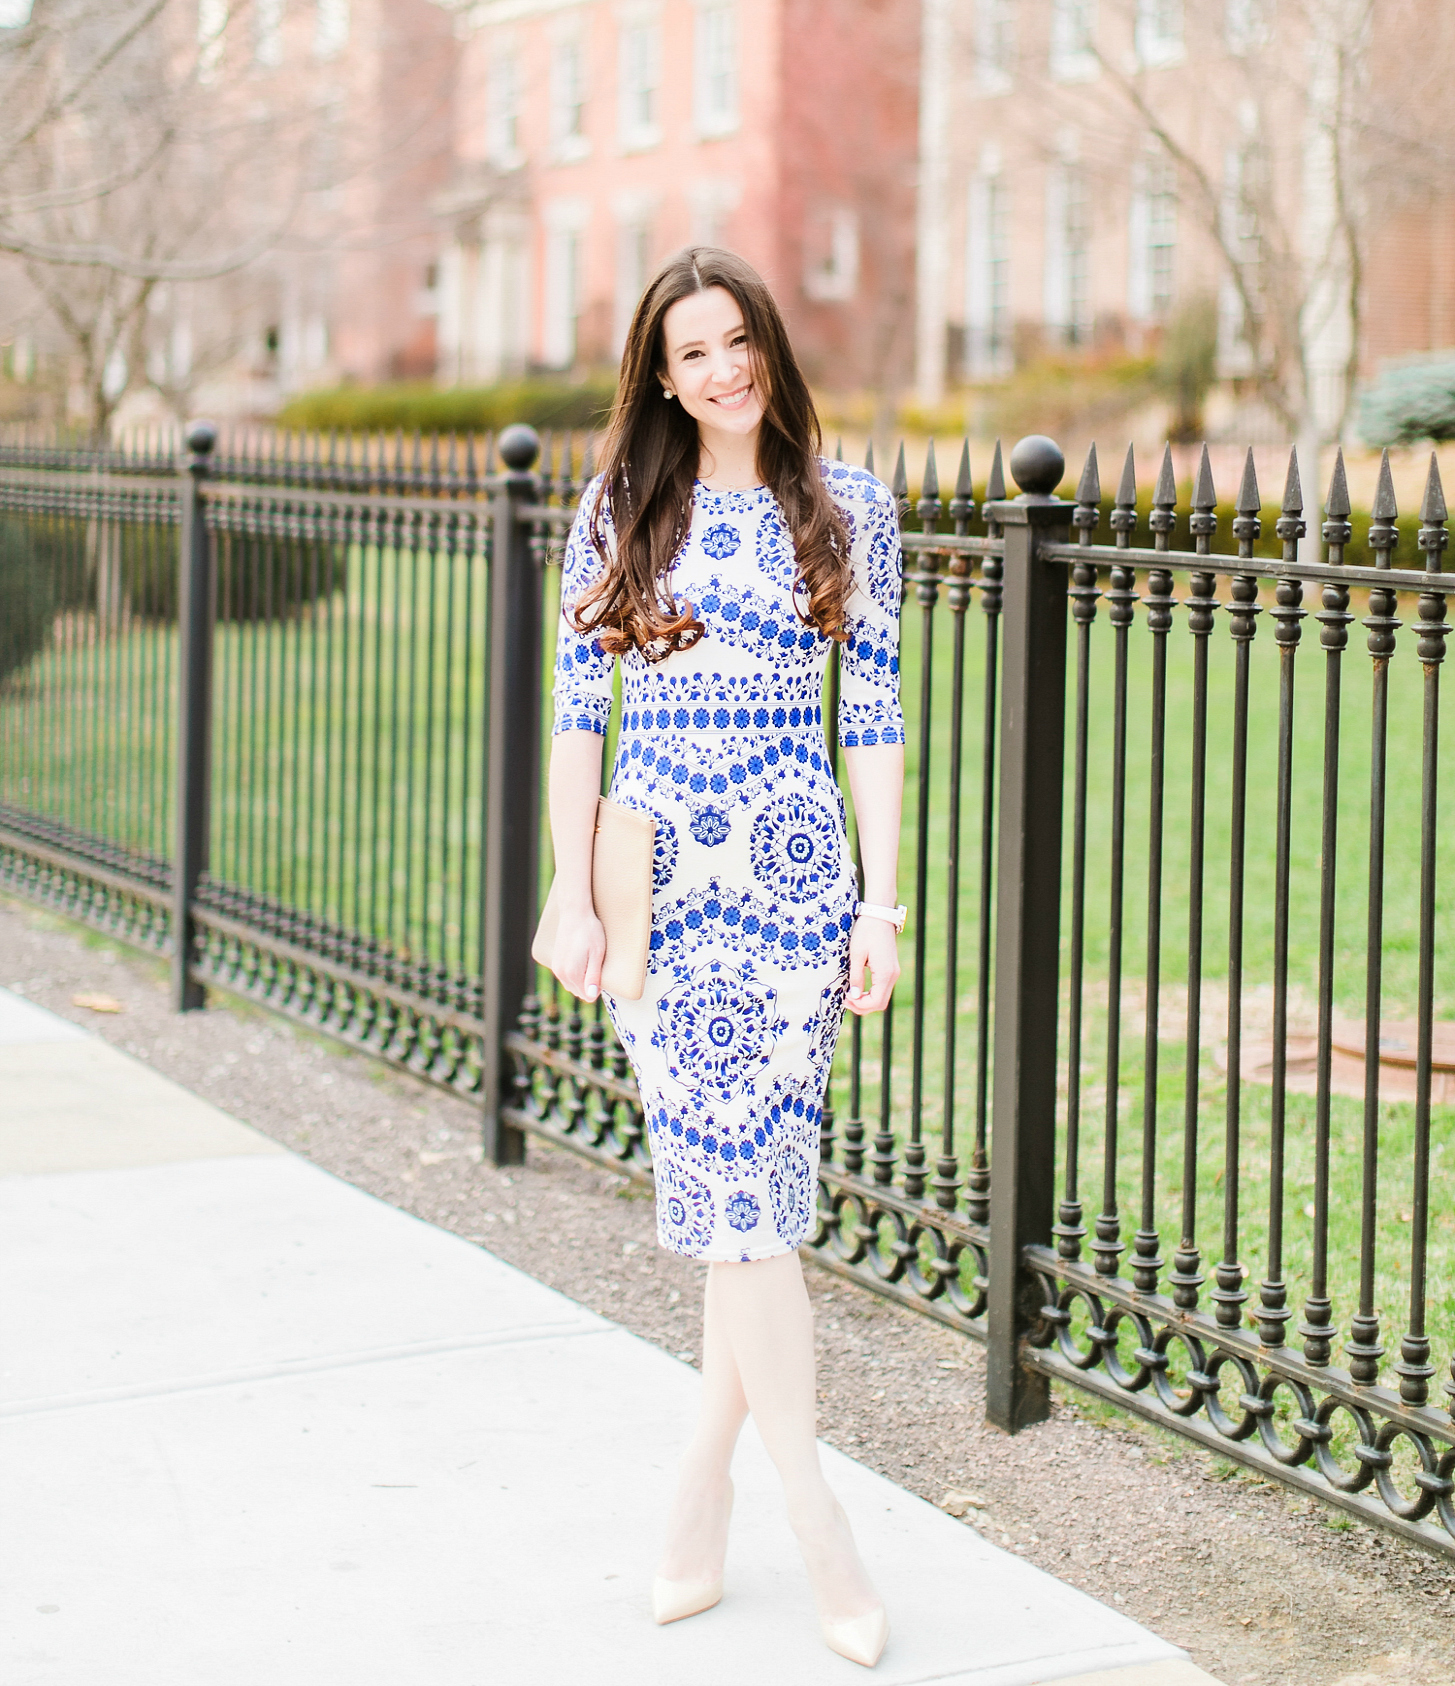 Best Dresses to Wear to a Spring Wedding by southern fashion blogger Stephanie Ziajka from Diary of a Debutante, spring wedding guest outfits, wedding guest dress ideas, dresses to wear to a spring wedding, porcelain print pencil dress